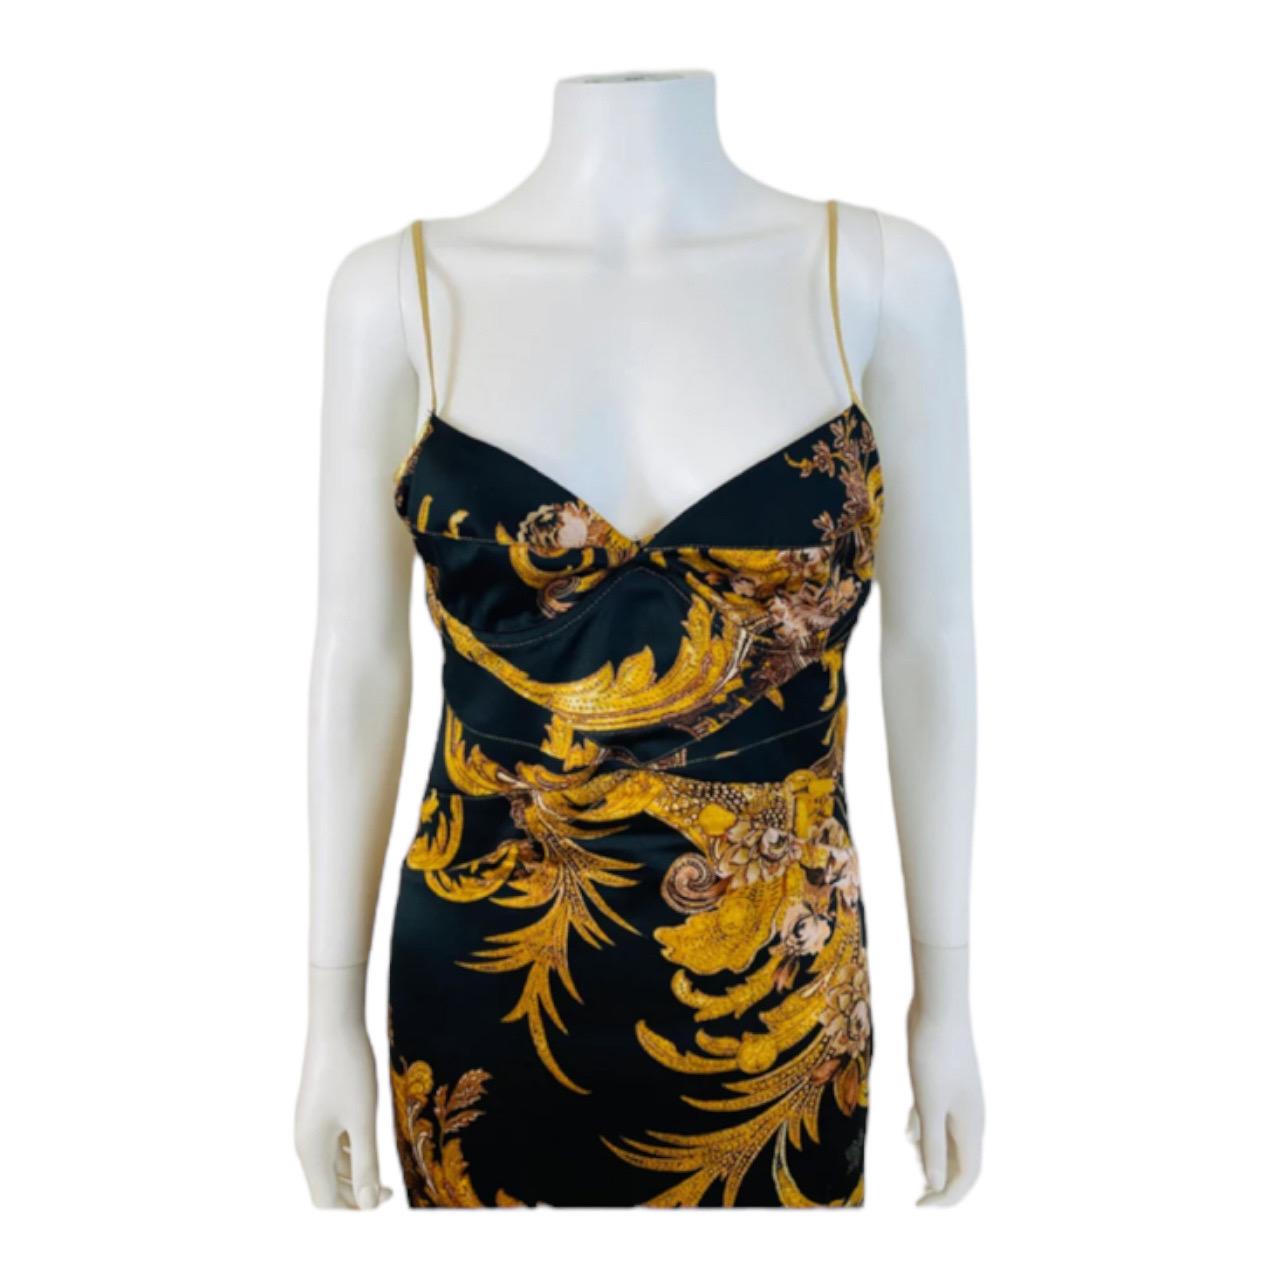 Vintage 2000s Y2K Just Cavalli Roberto Cavalli Black Gold Baroque Dress Gown In Excellent Condition For Sale In Denver, CO